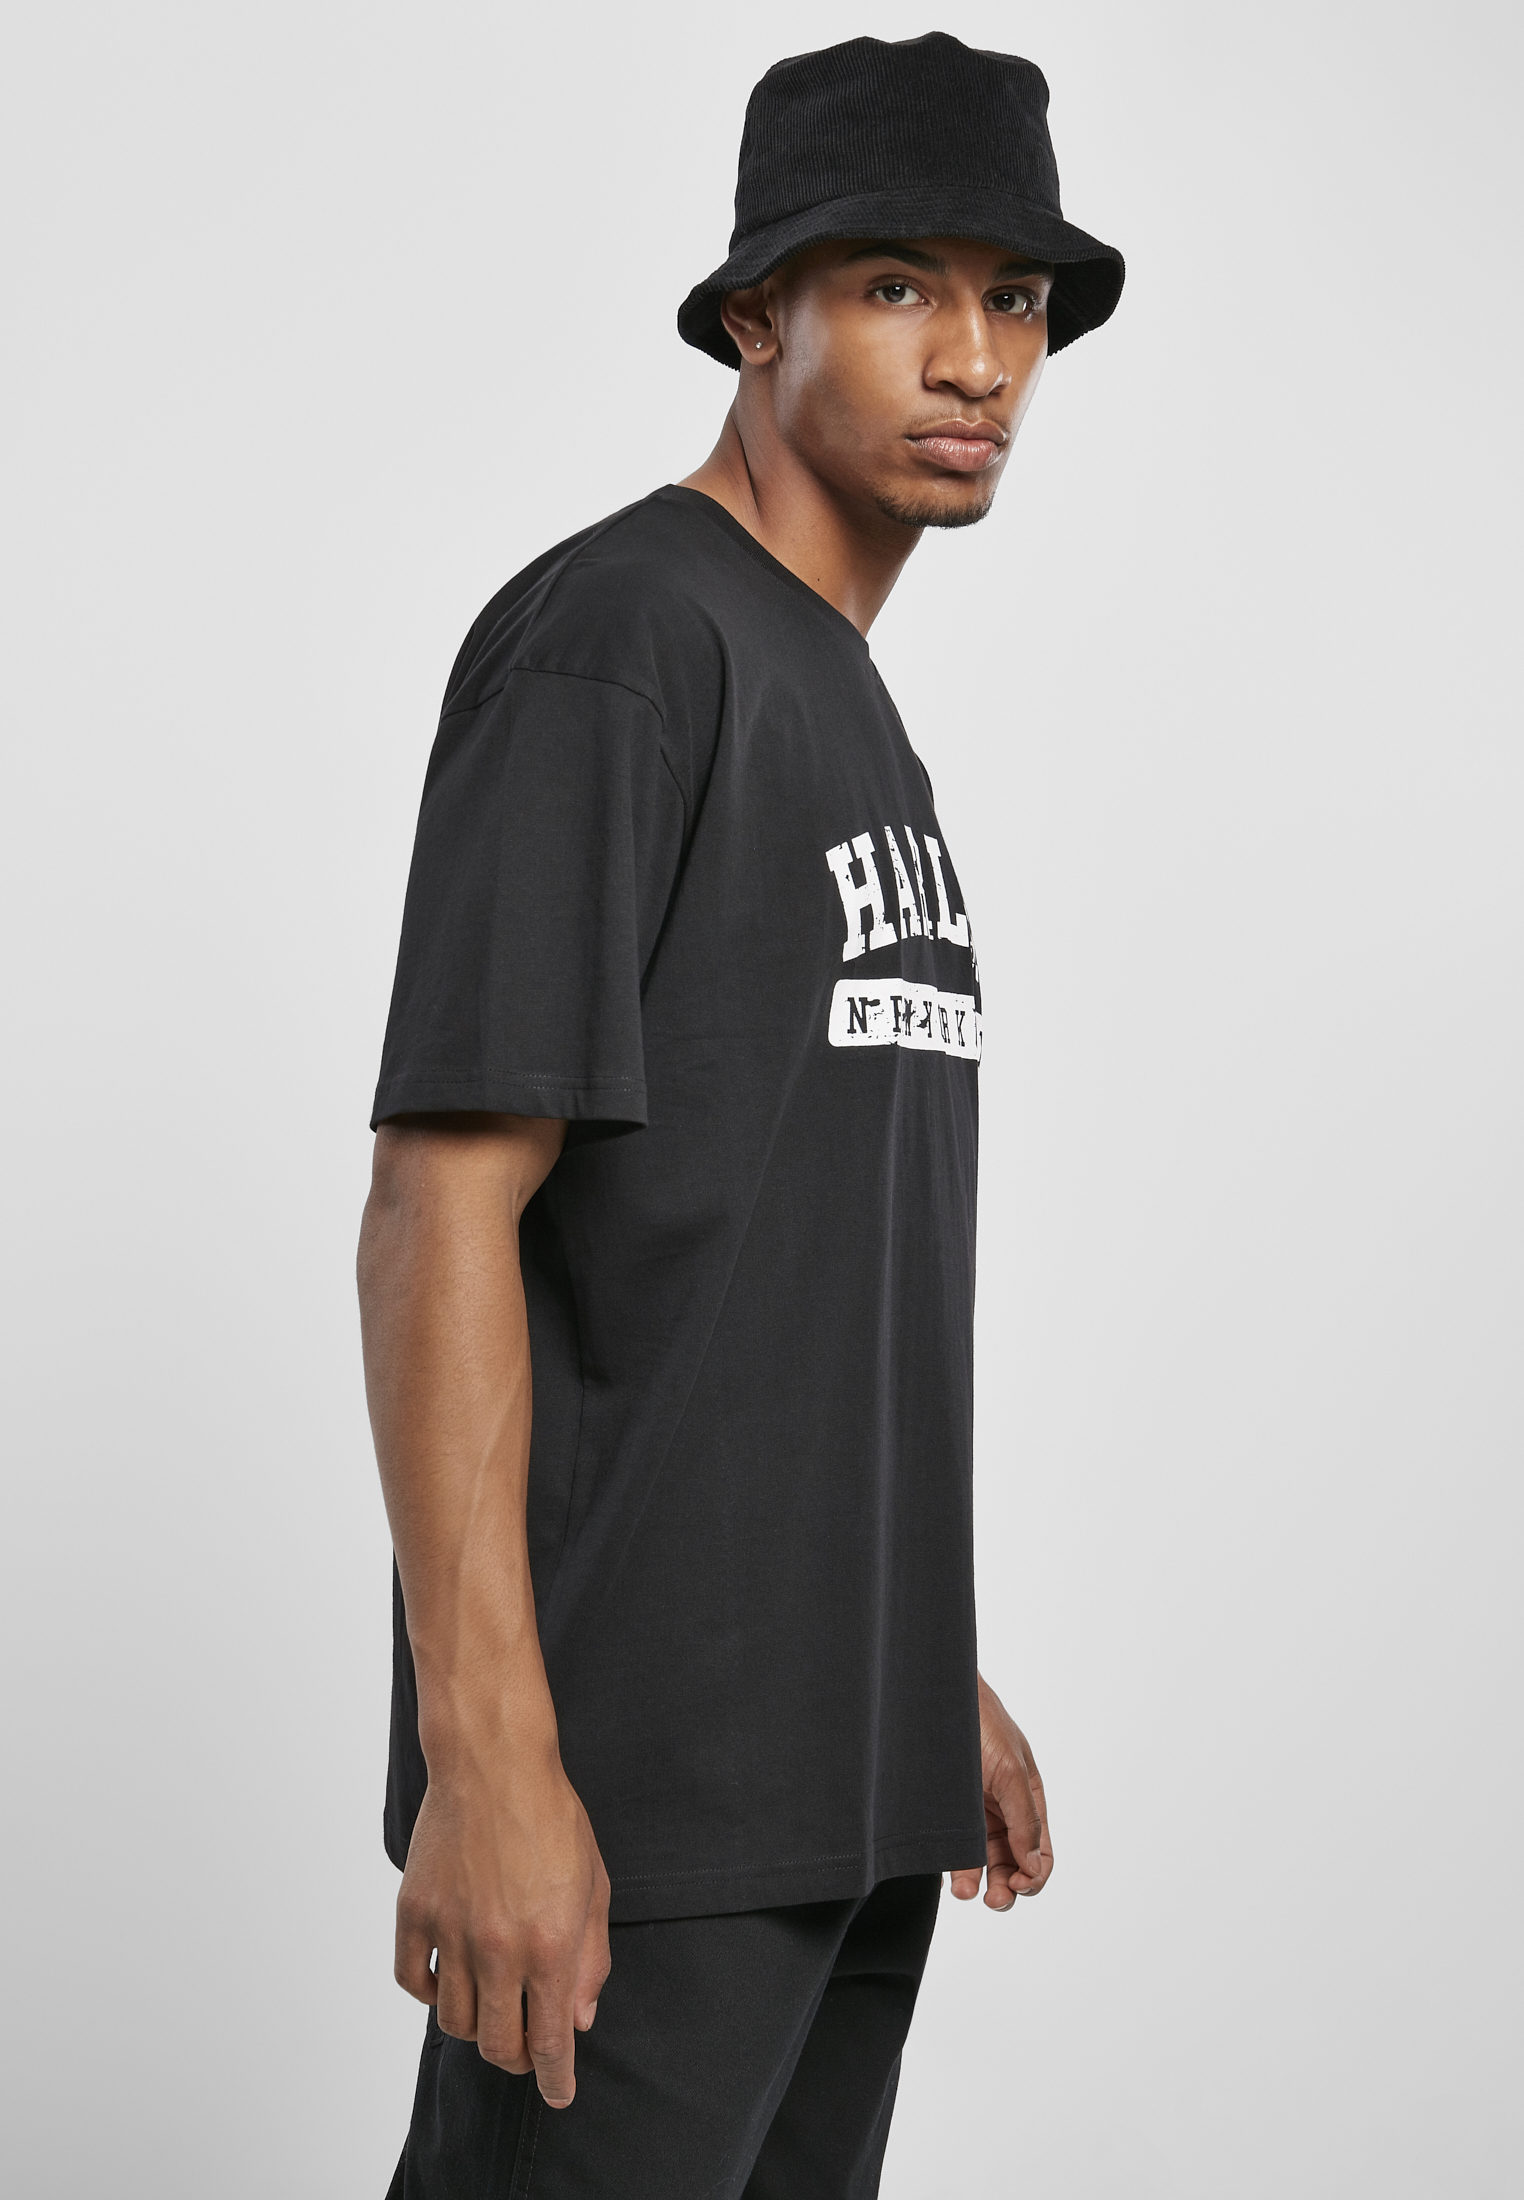 Saisonware Southpole Harlem Tee in Farbe black